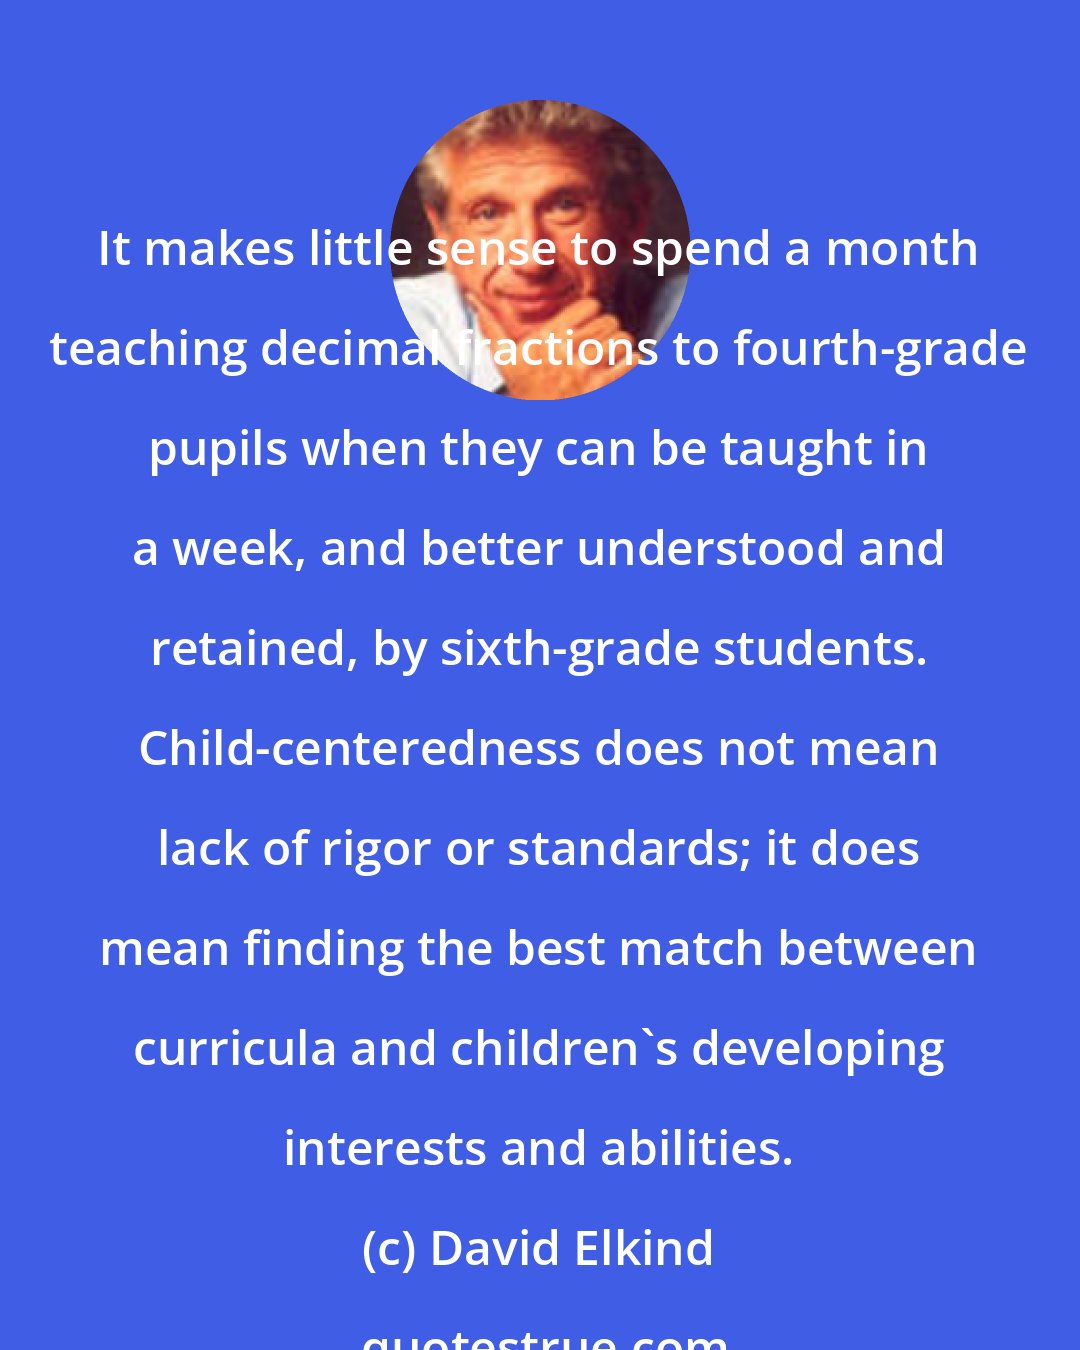 David Elkind: It makes little sense to spend a month teaching decimal fractions to fourth-grade pupils when they can be taught in a week, and better understood and retained, by sixth-grade students. Child-centeredness does not mean lack of rigor or standards; it does mean finding the best match between curricula and children's developing interests and abilities.